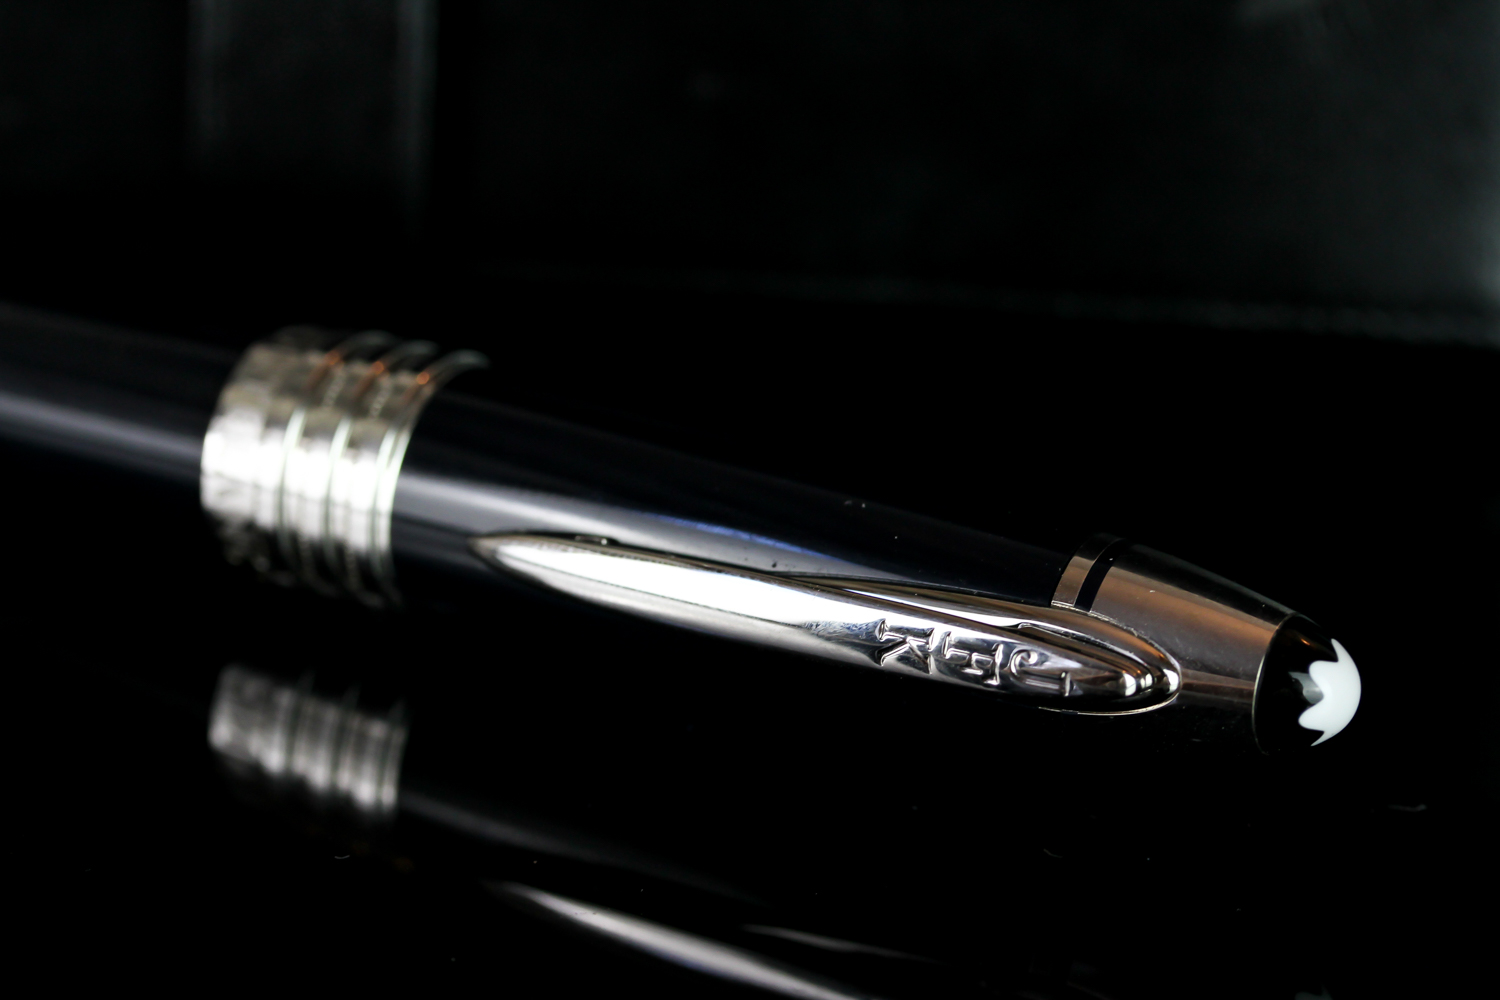 GENTLEMANS MONT BLANC JFK BALLPOINT PROPELLING PEN,MBJH4G302,black resin and white metal, comes with - Image 2 of 2